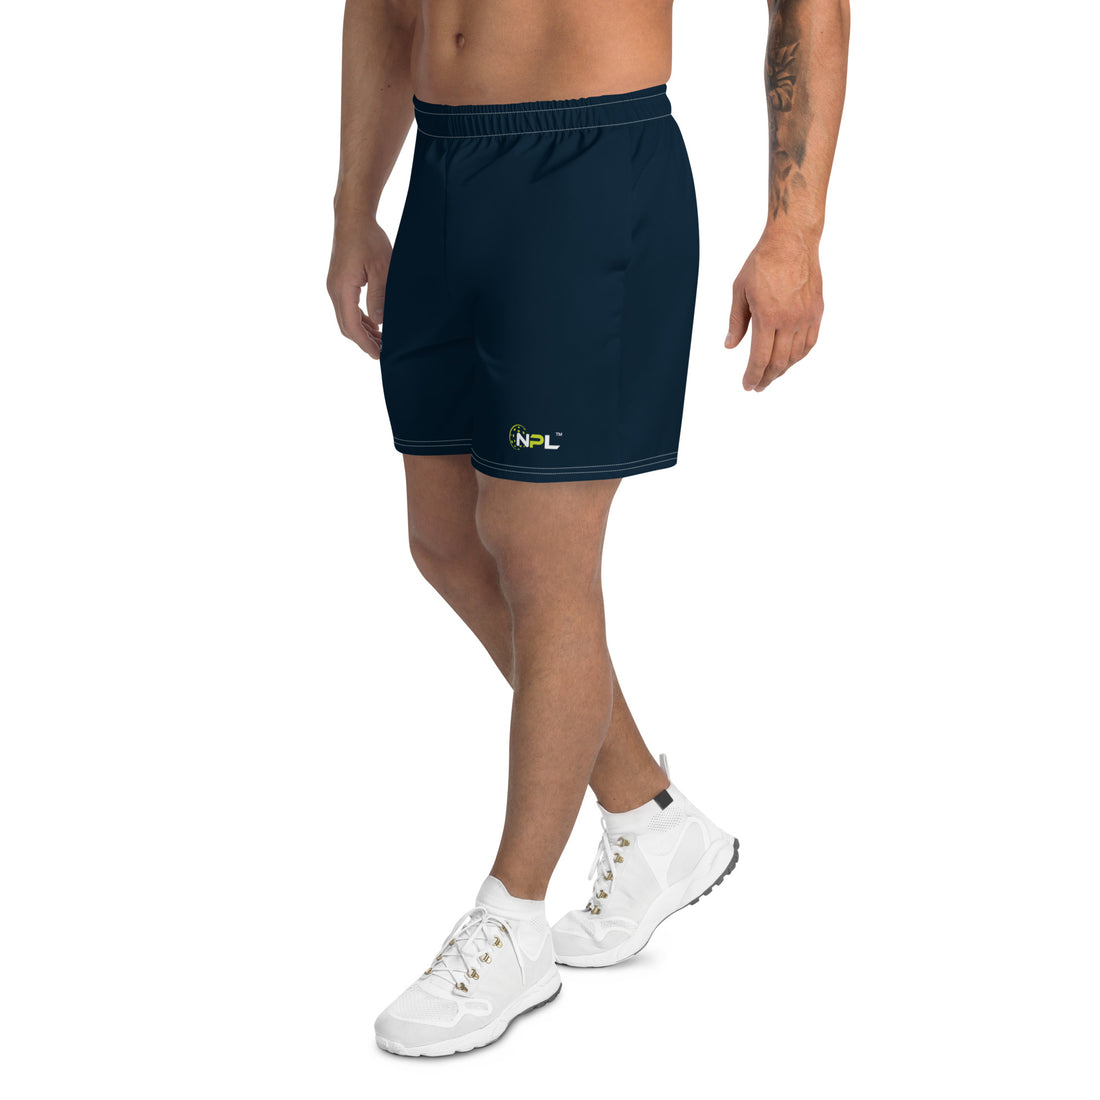 Carl Foster 1 Boca Raton Picklers™ SKYblue™ 2023 Authentic Shorts for Men - Dark Blue